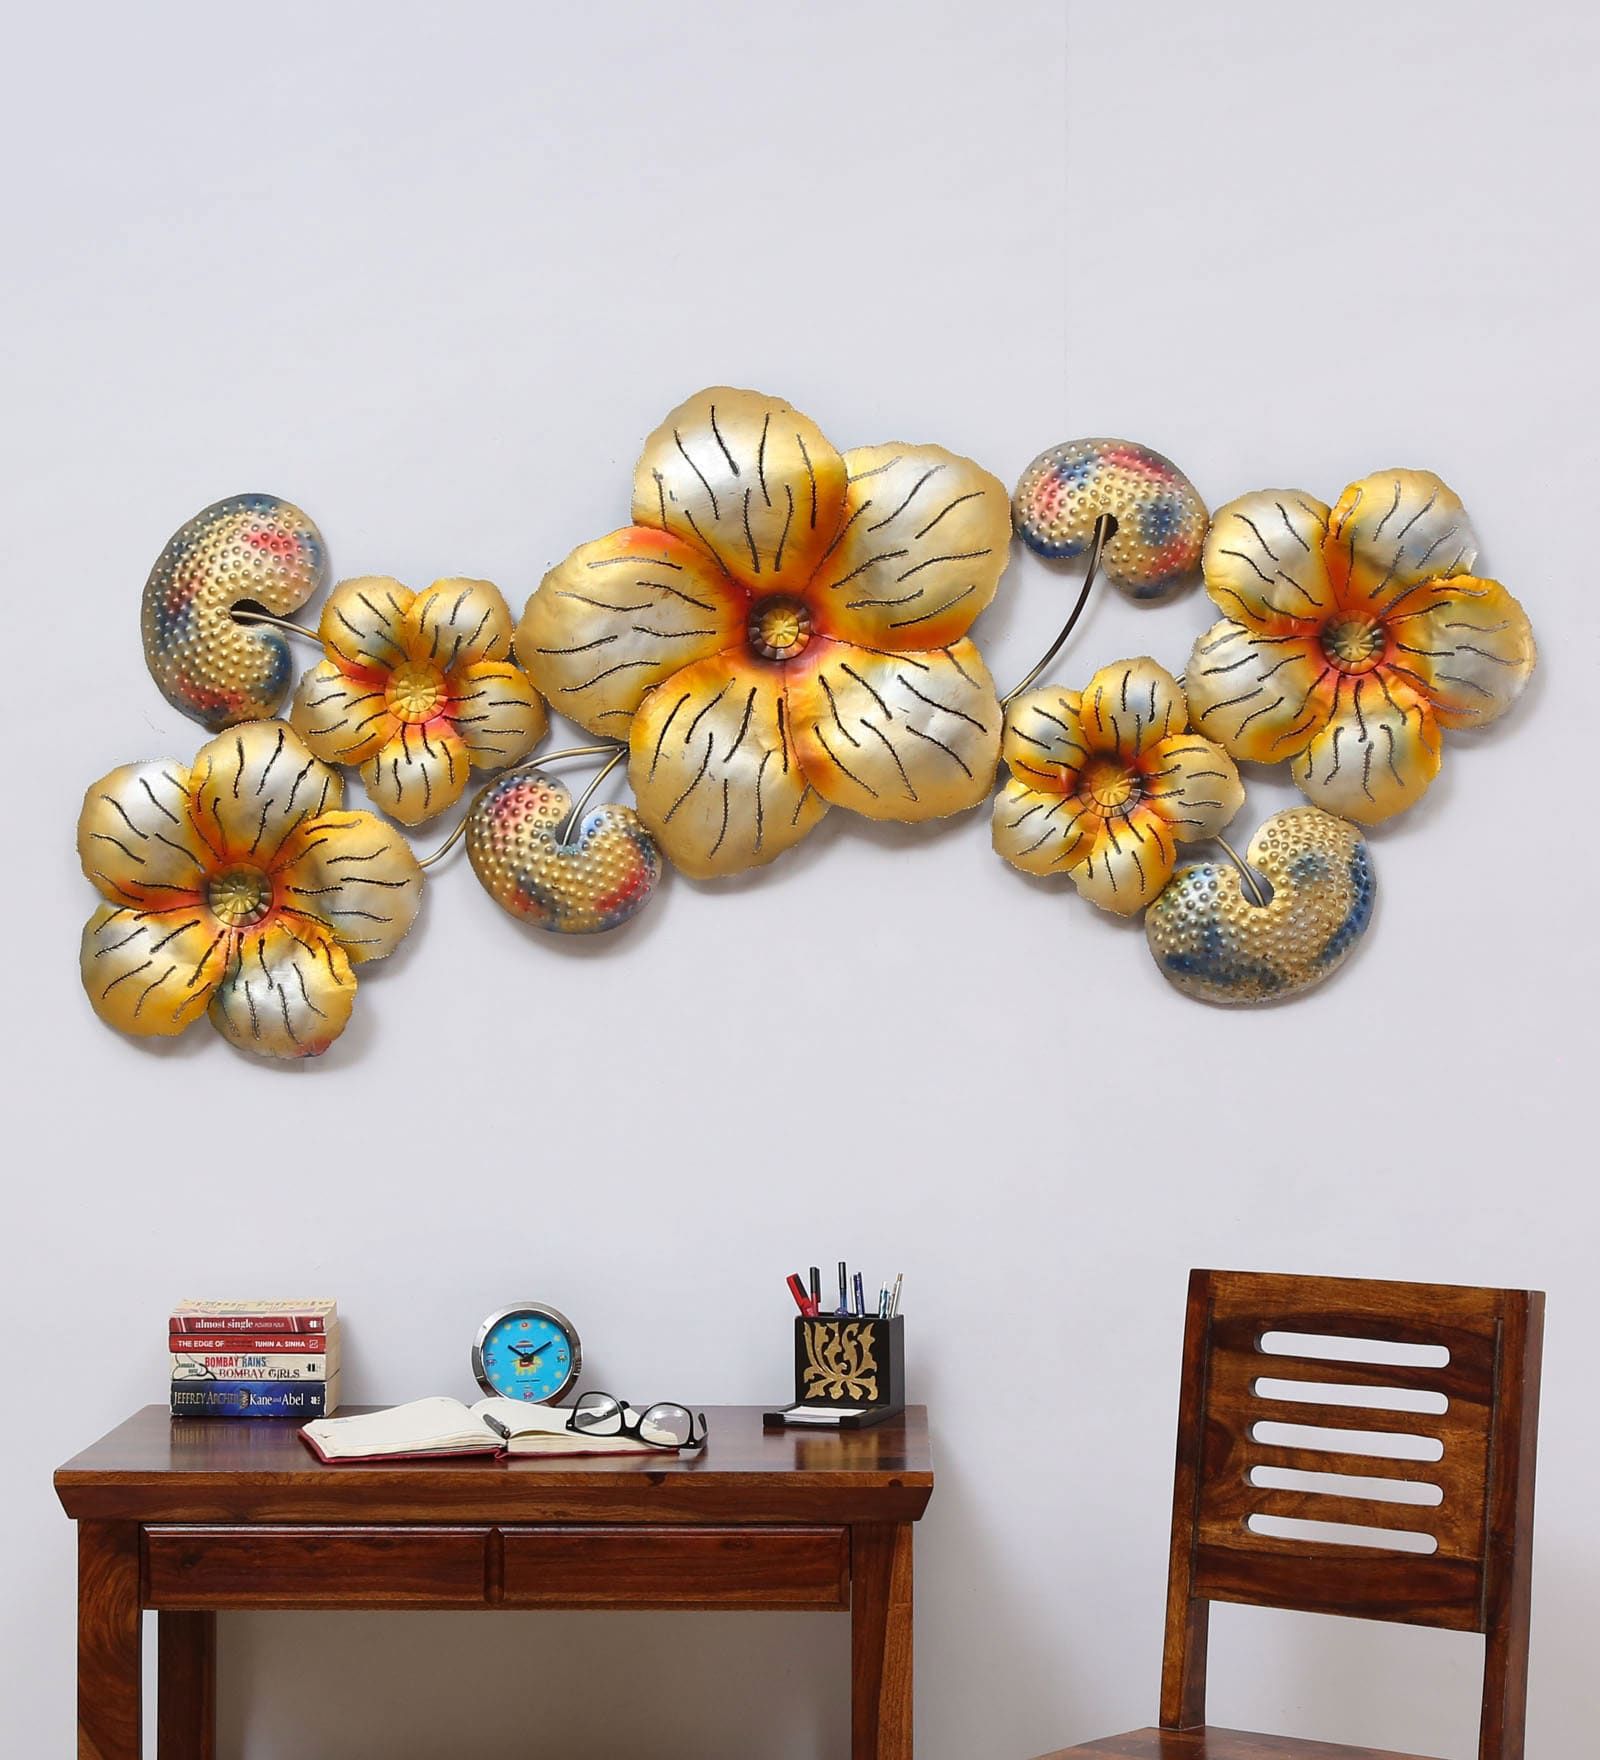 Buy Gold Iron Big Flower Metal Wall Art Online Intended For Most Recently Released Limber Metal Wall Art (View 1 of 20)